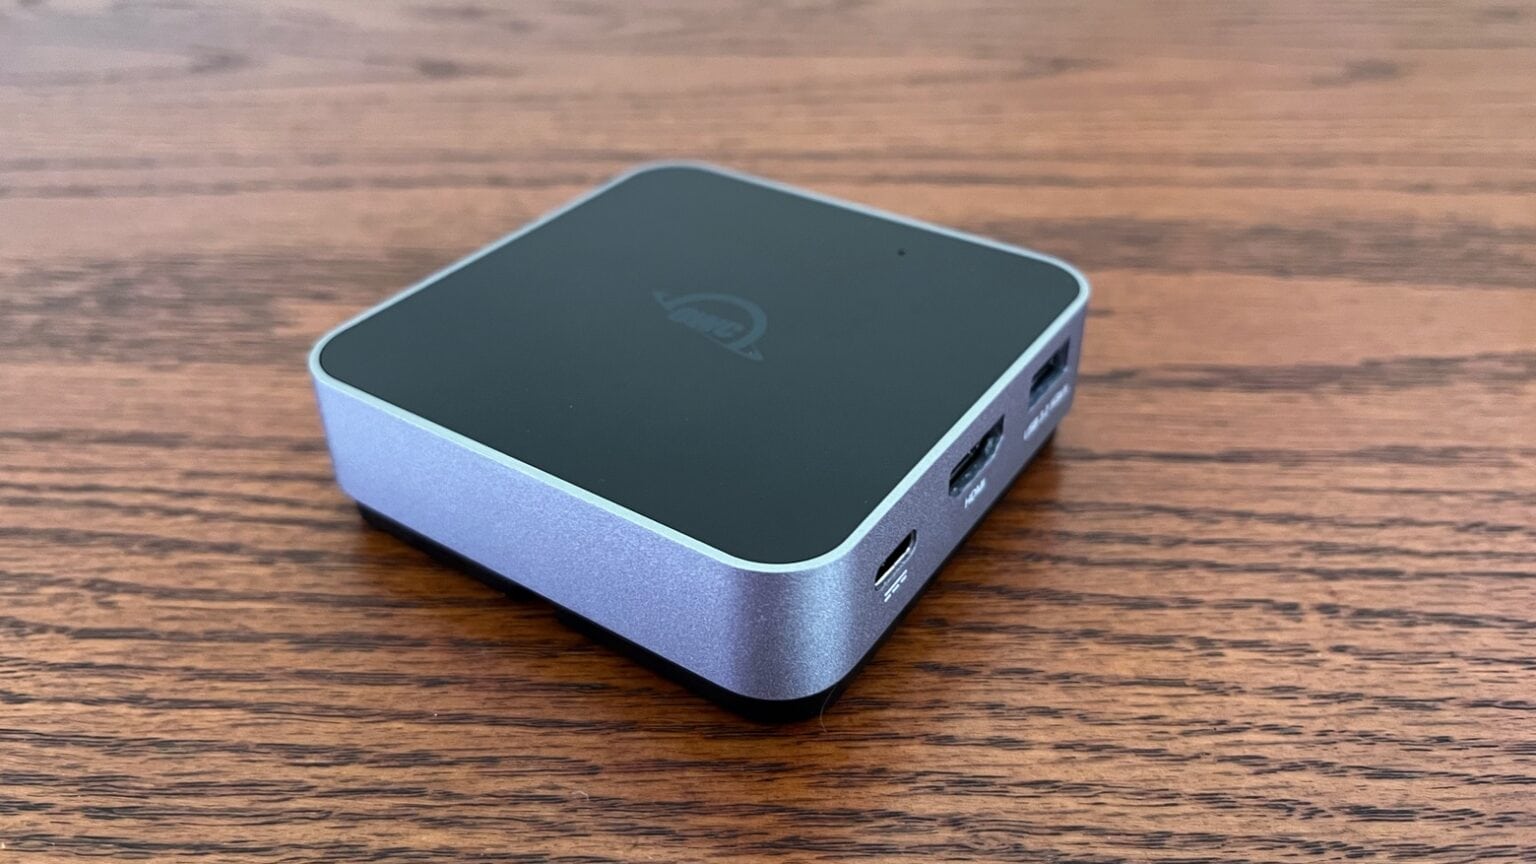 OWC’s new 6-port USB-C hub is tough and portable [Review]